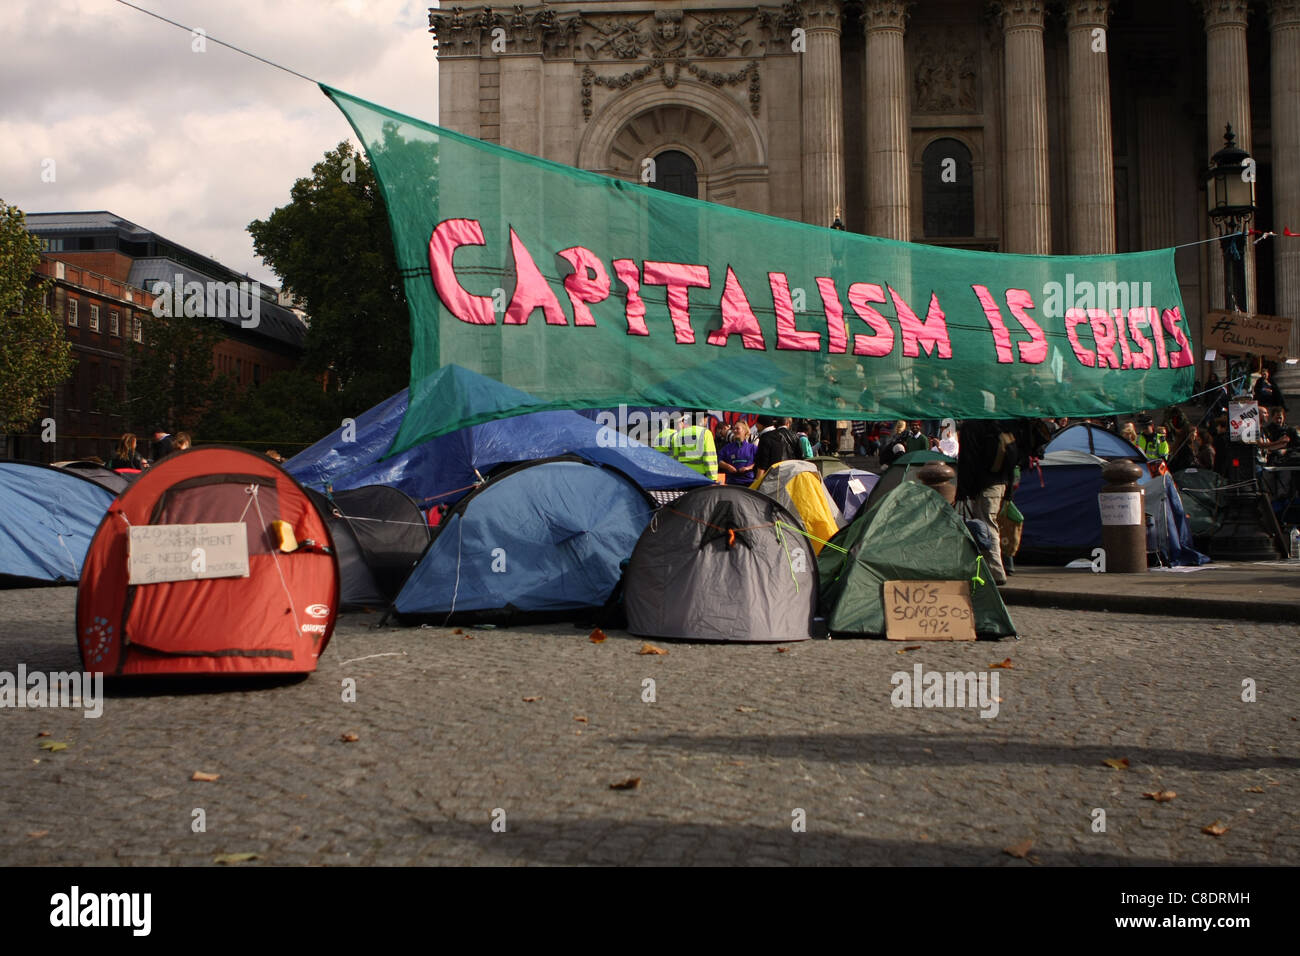 A banner and tents belonging to anti-capitalist protesters outside St Paul's Cathedral in London Stock Photo